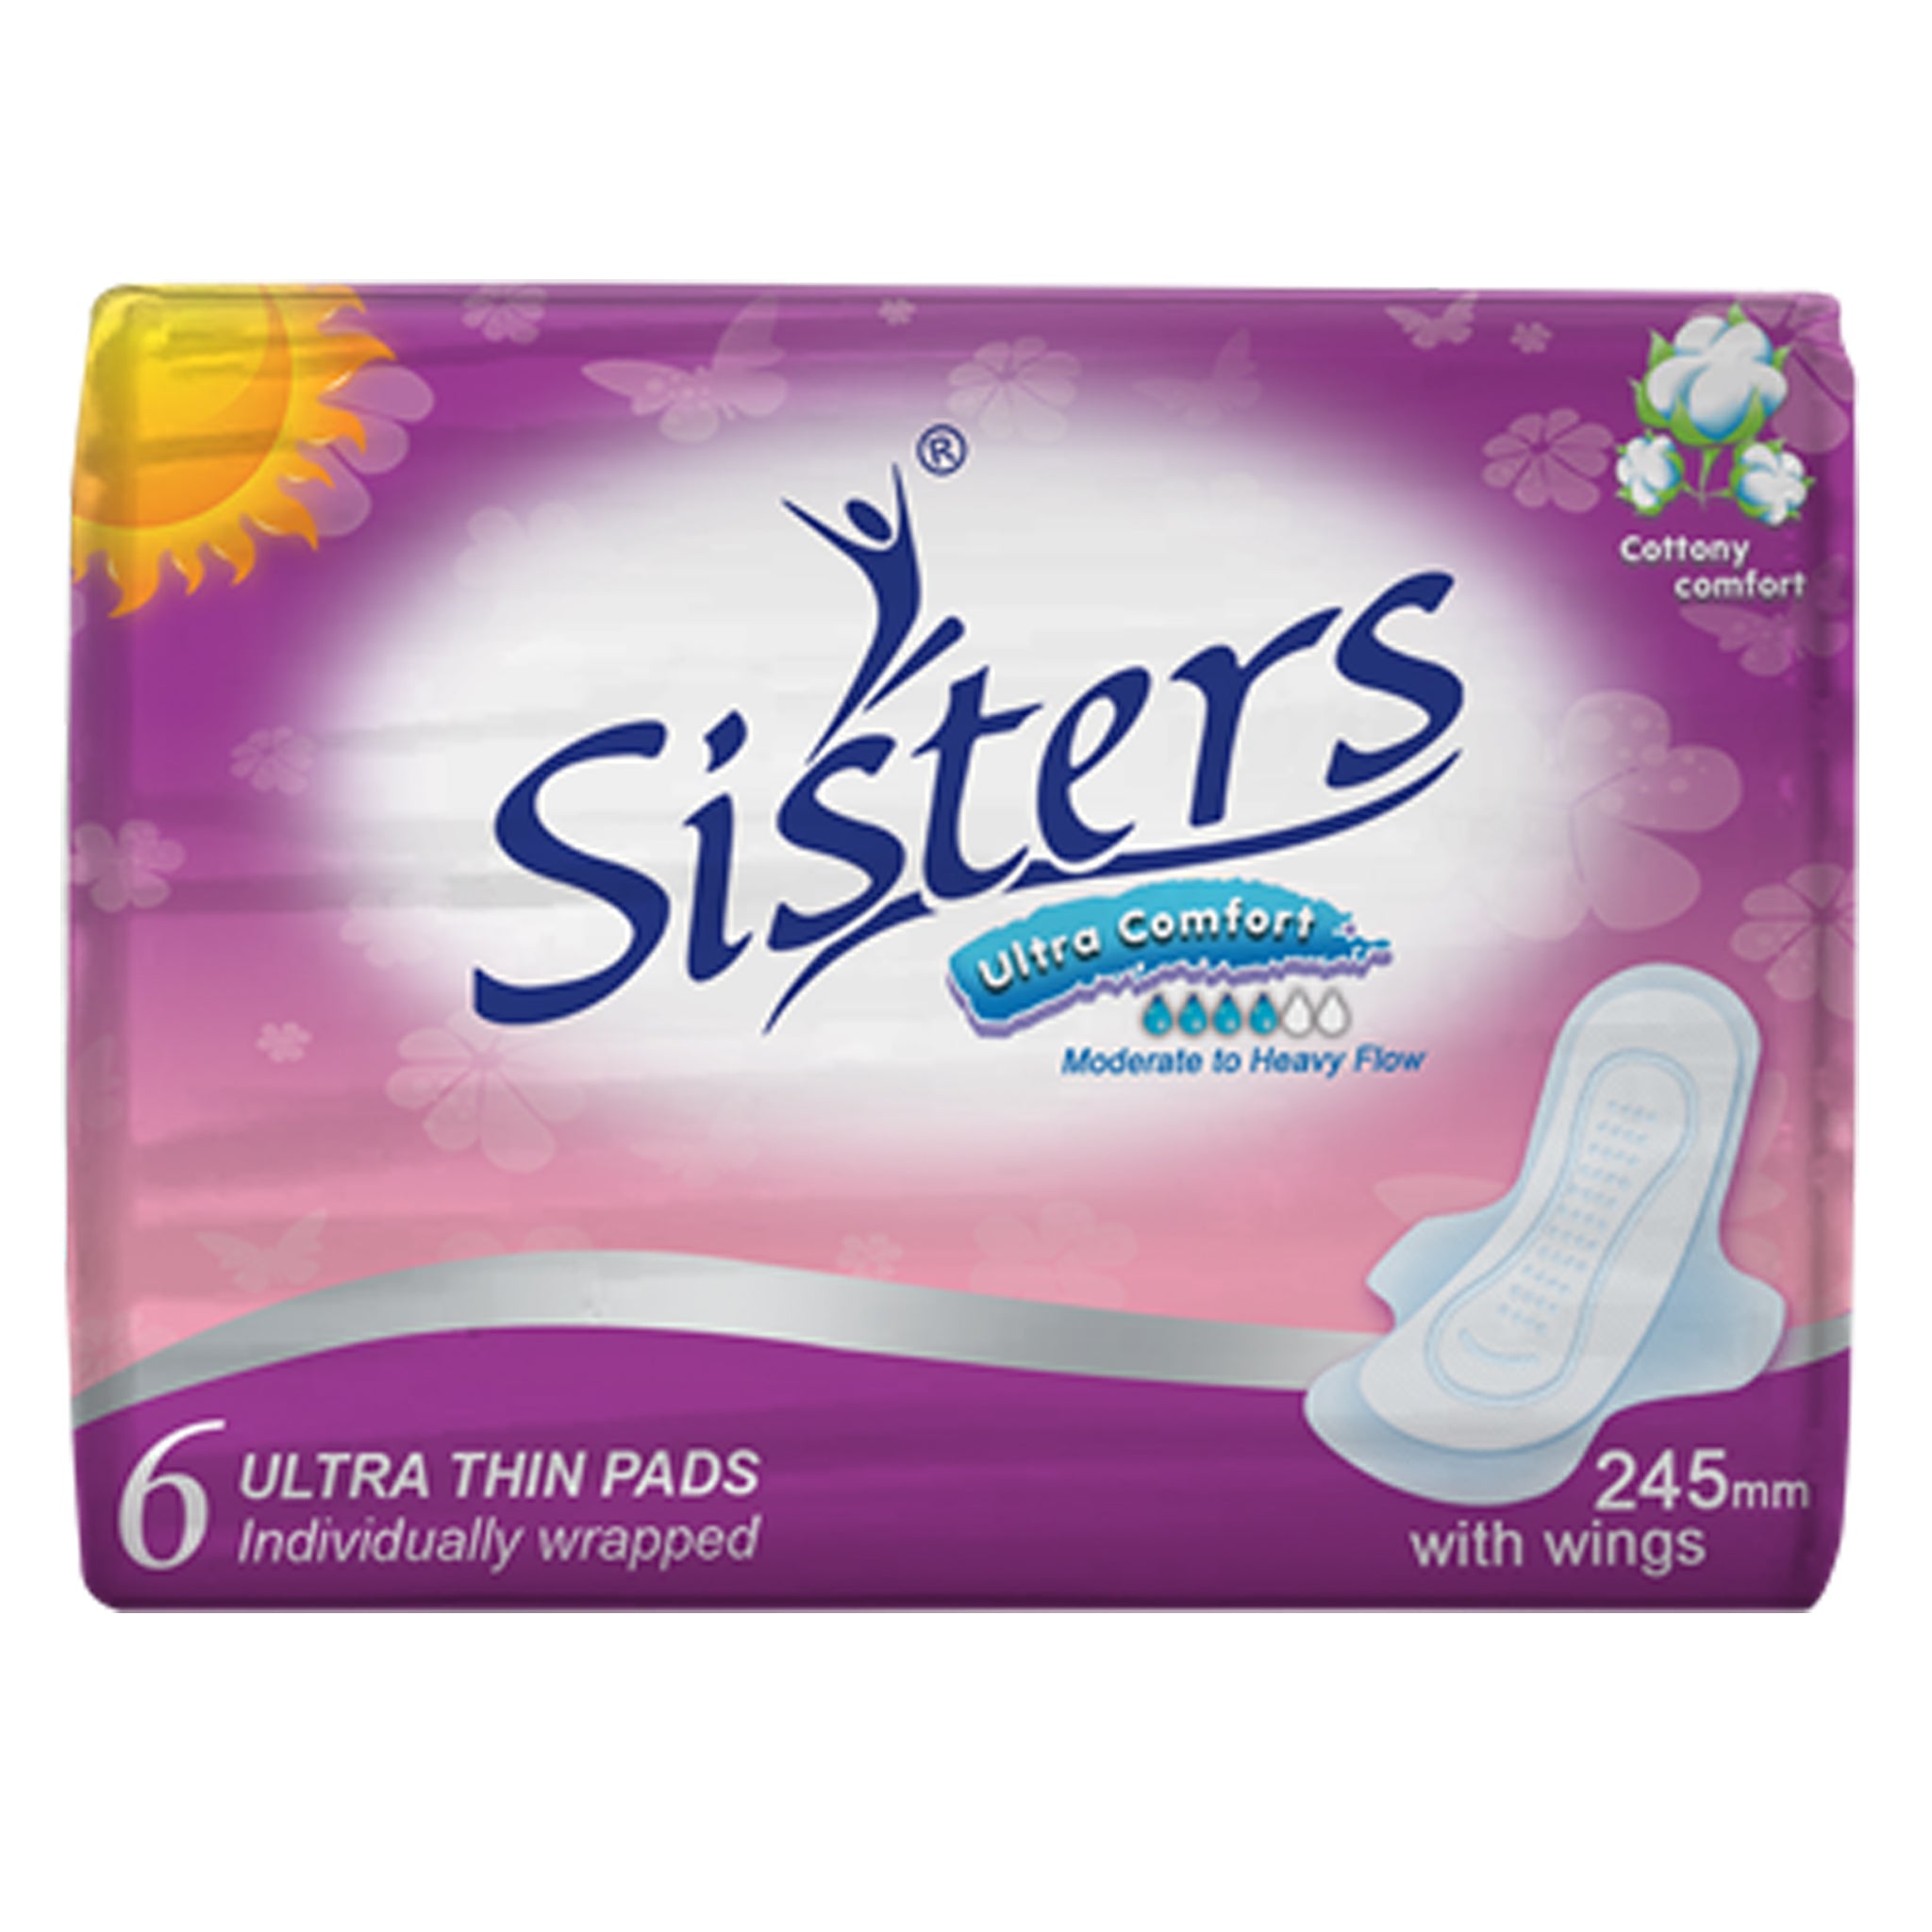 SISTERS SANITARY NAPKIN ULTRA-THIN COTTON 24.5CM WING 6PCS – NEST Realty  and Development Corporation